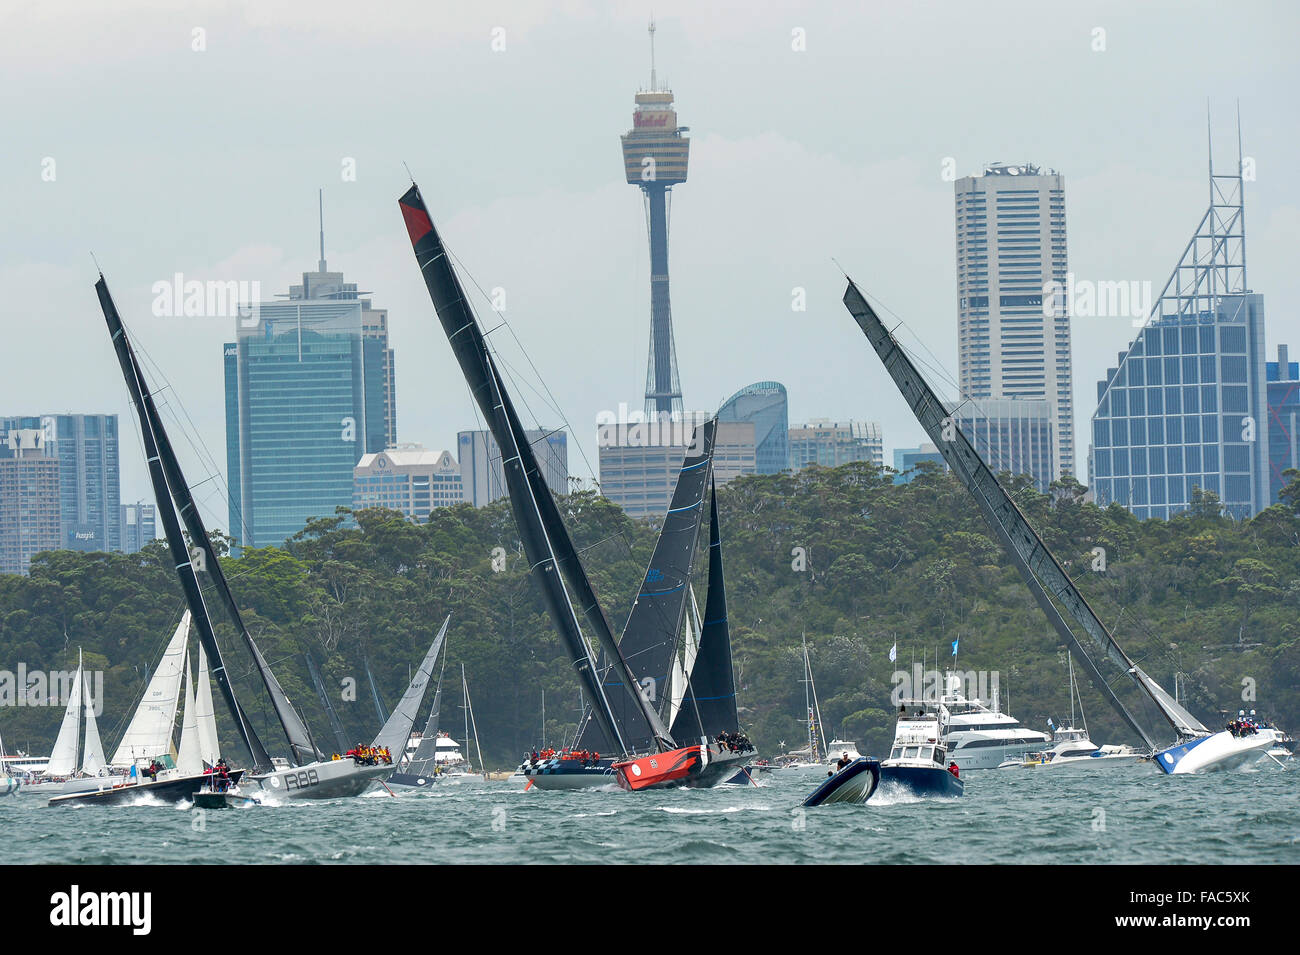 Sydney, Australia. 26th Dec, 2015. Rolex Sydney to Hobart Yacht race 2015. Comanche owned by Jim Clark &amp; Kristy Hinze Clark from SA skippered by skipper Ken Read type 100 Supermaxi, Wild Oats XI owned by Robert Oatley from NSW skippered by Mark Richards type RP100, Rambler owned by George David from the USA type Jk 27m Canting Maxi during the start of the 629 nautical mile race from Sydney to Hobart on Sydney Harbour. © Action Plus Sports/Alamy Live News Stock Photo